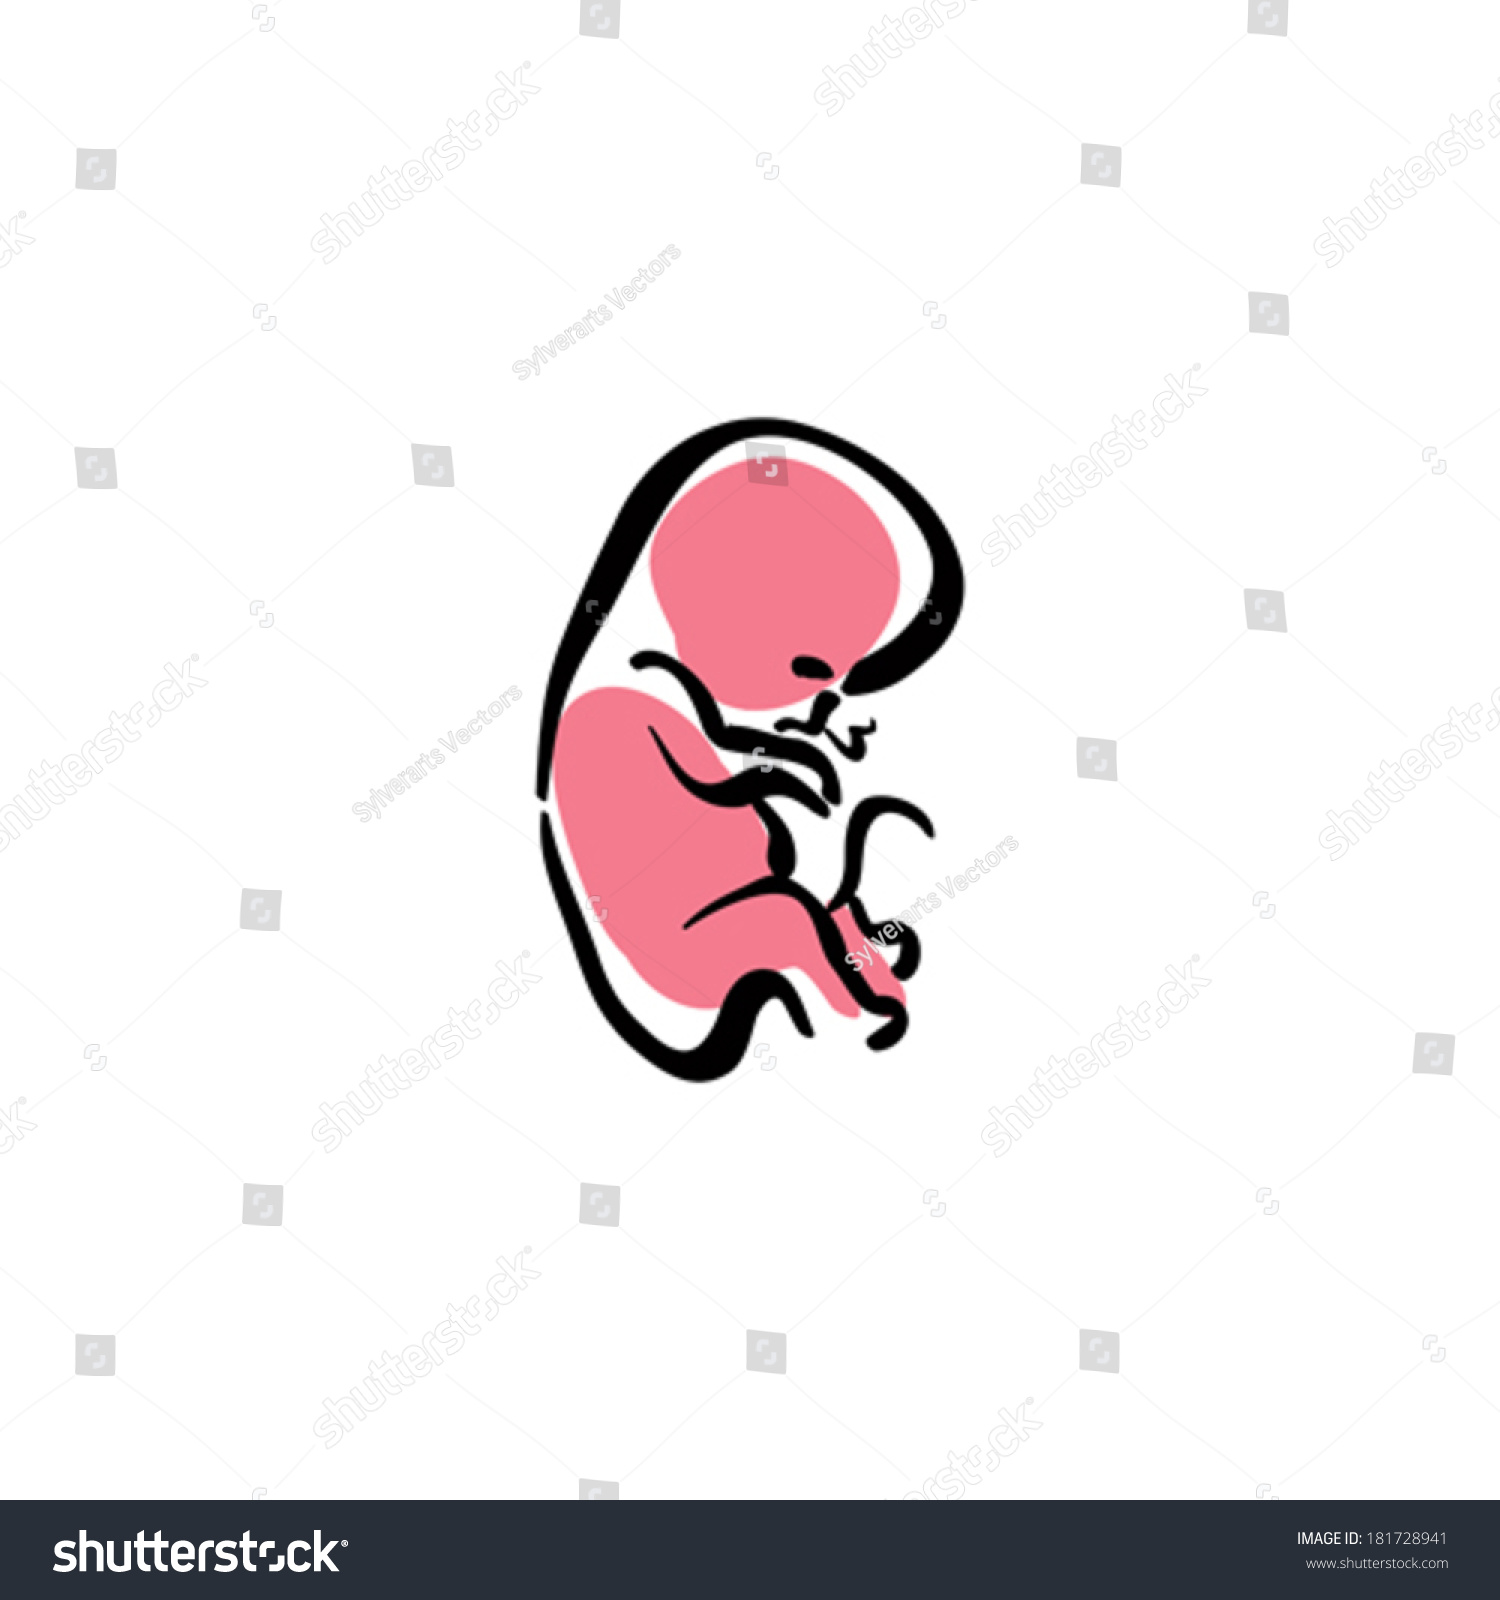 baby ultrasound clipart - photo #44